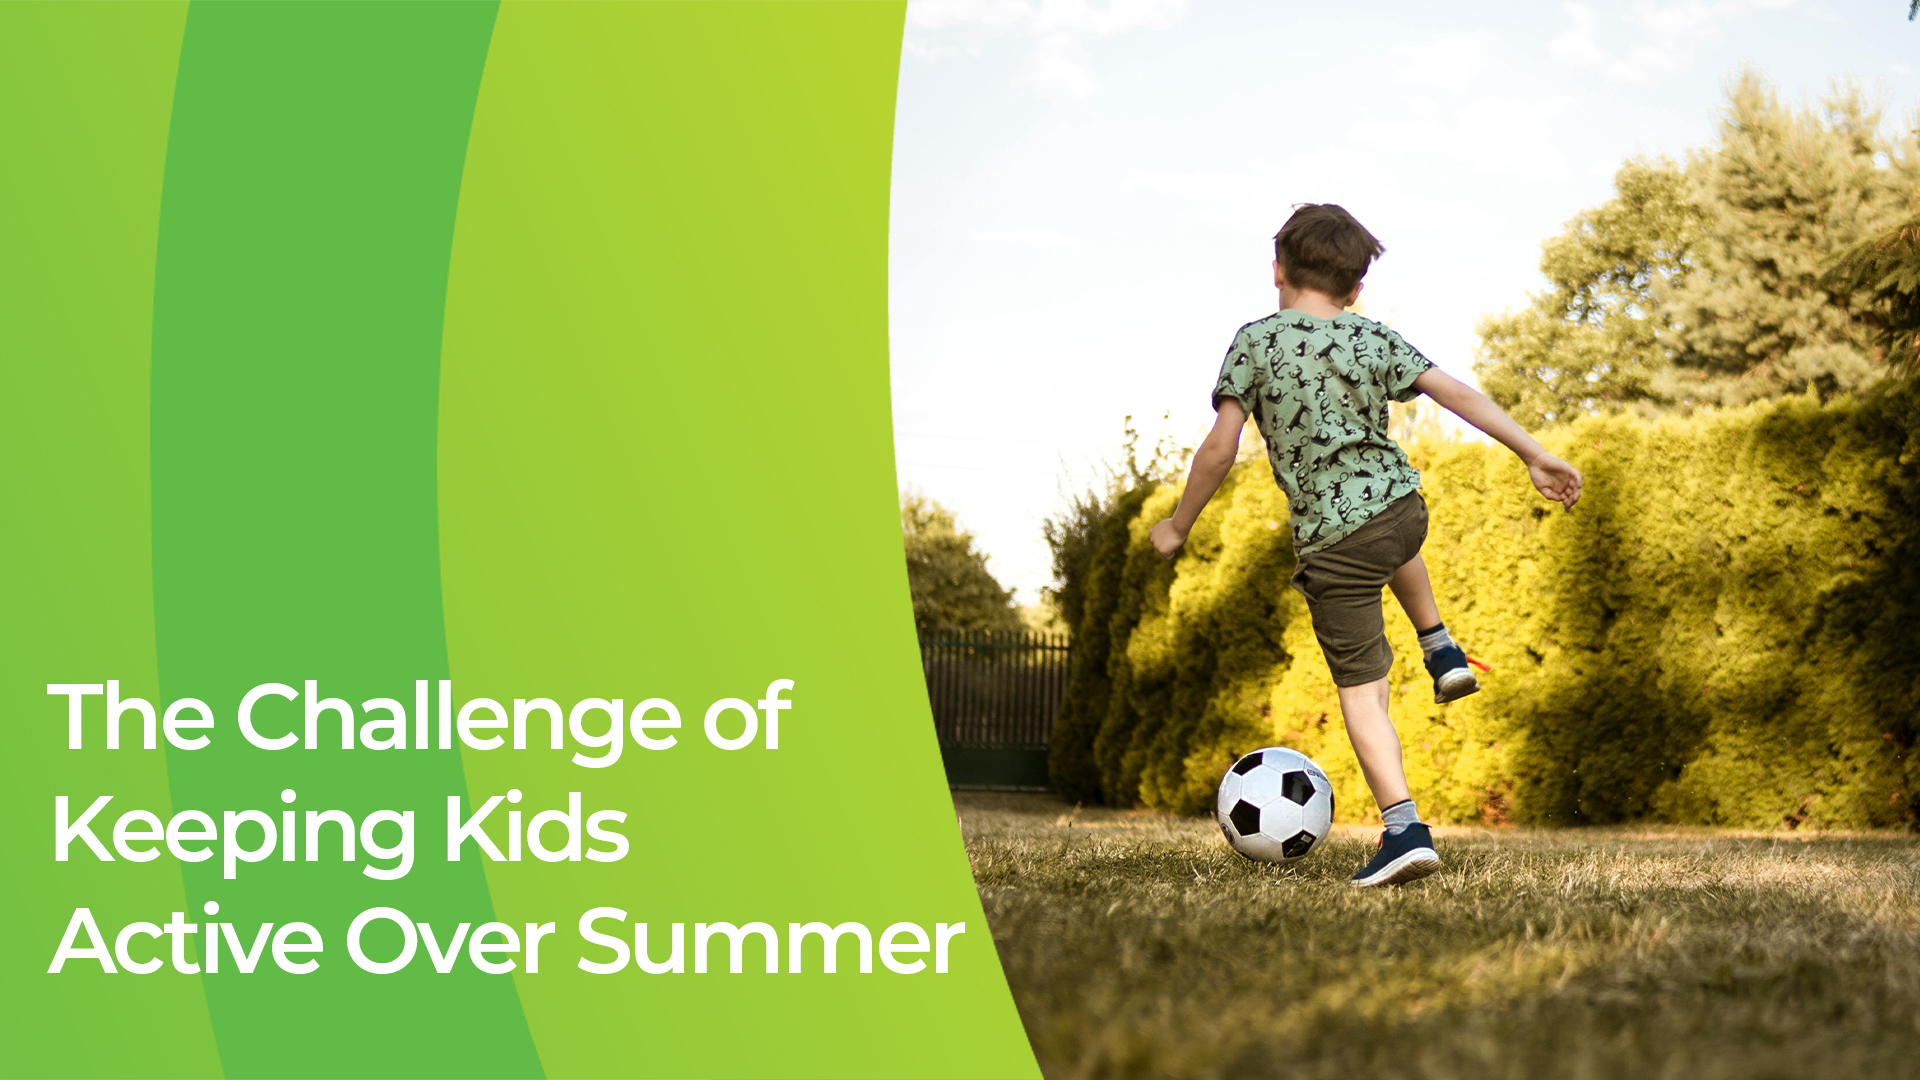 The Challenge of Keeping Kids Active Over Summer